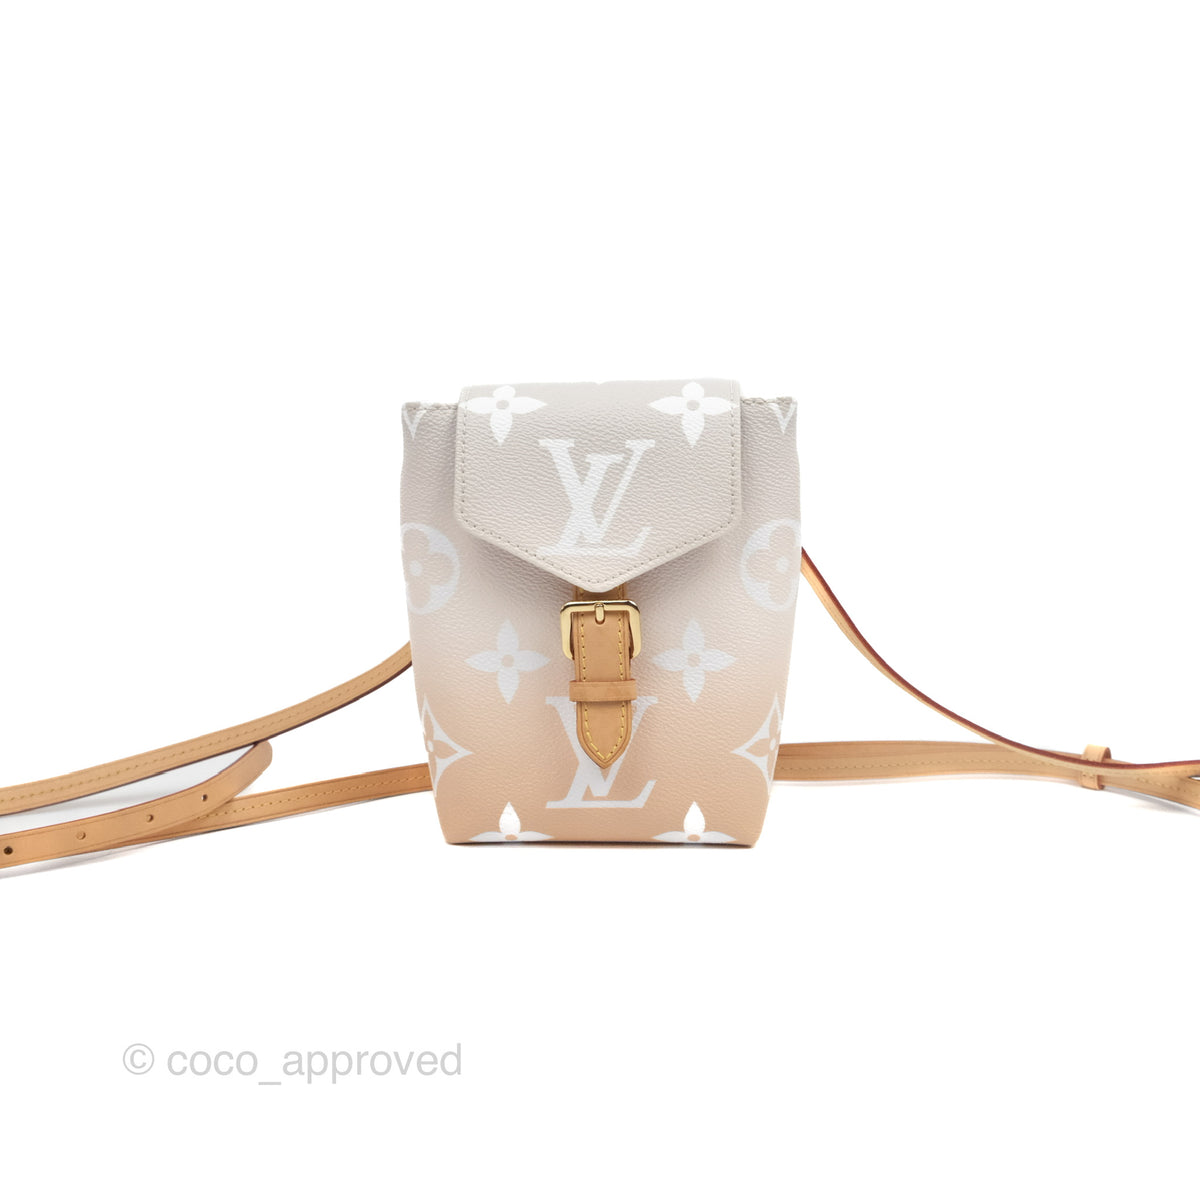 Louis Vuitton Monogram By The Pool Tiny Backpack - Neutrals Backpacks,  Handbags - LOU682175